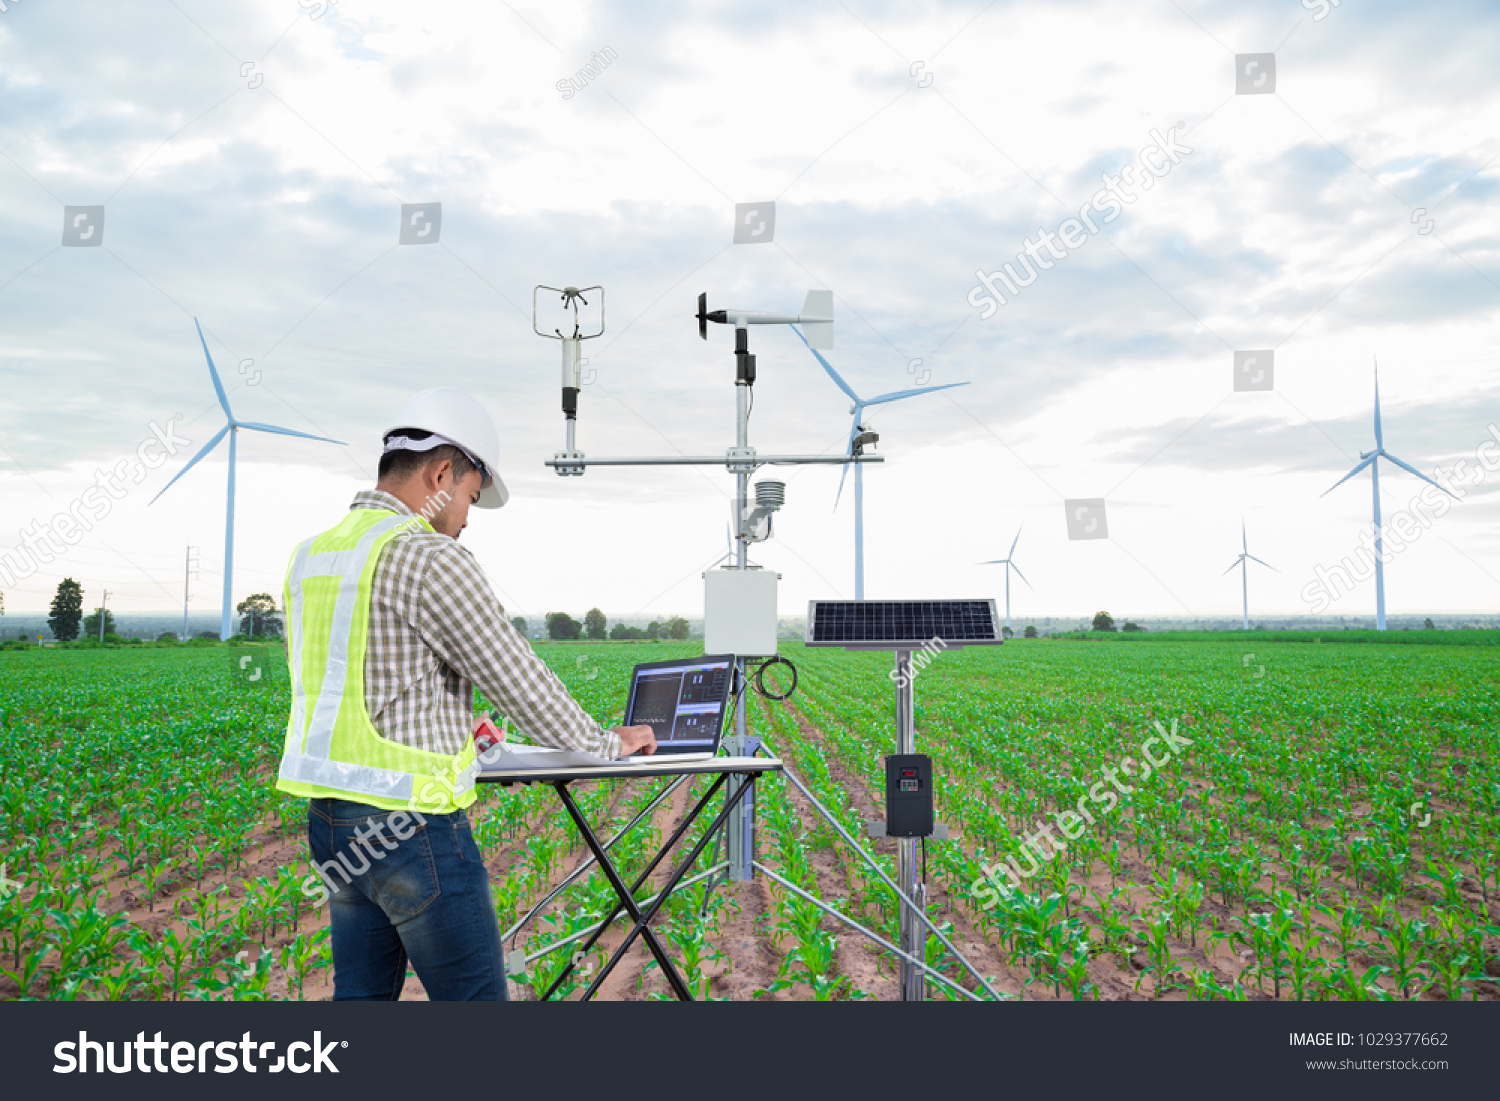 Engineer using tablet computer collect data with meteorological instrument to measure the wind speed, temperature and humidity and solar cell system on corn field background, Smart agriculture concept #1029377662